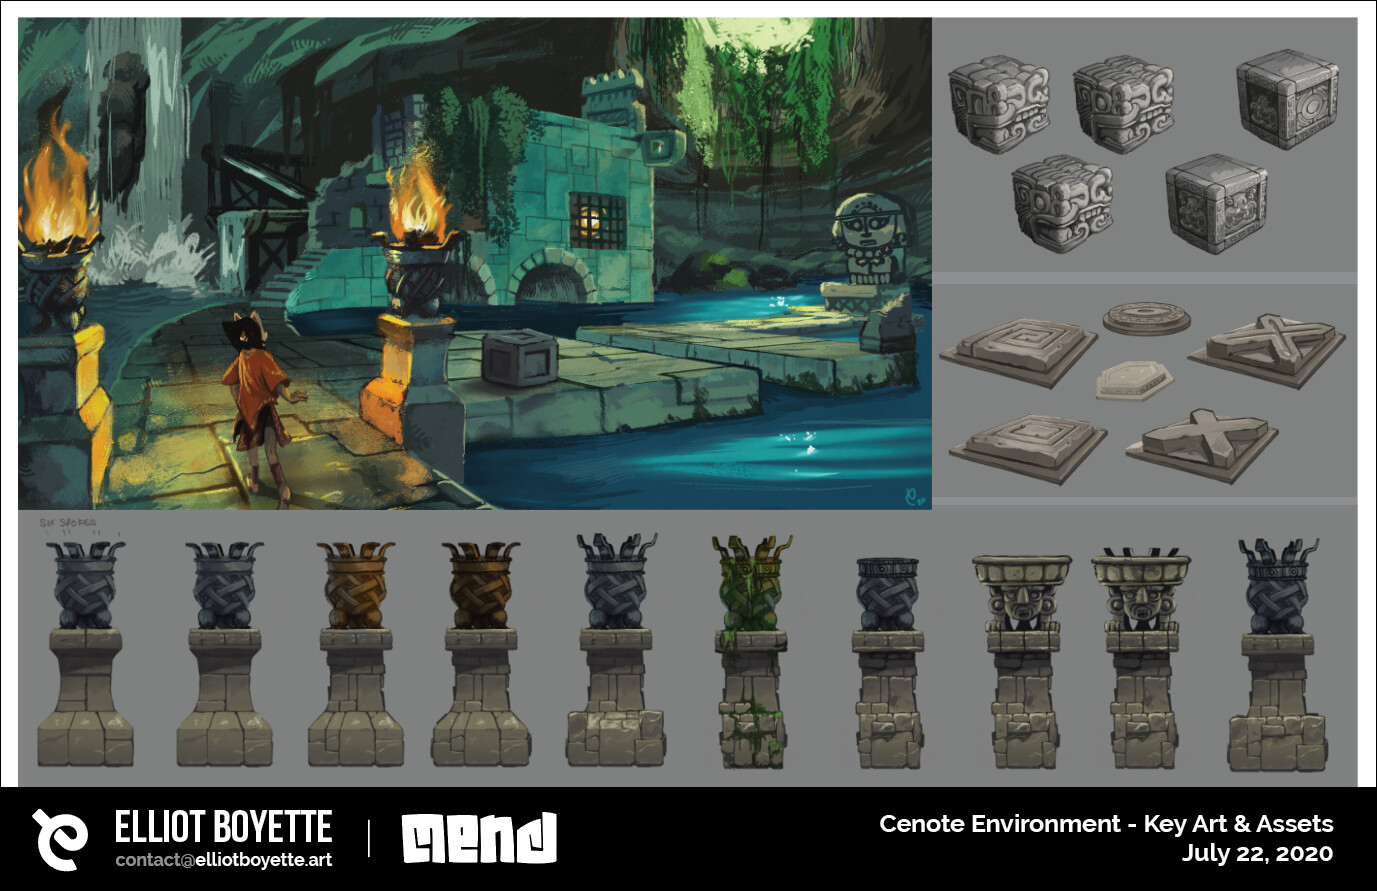 Original mood art for the cenote along with some brazier designs.